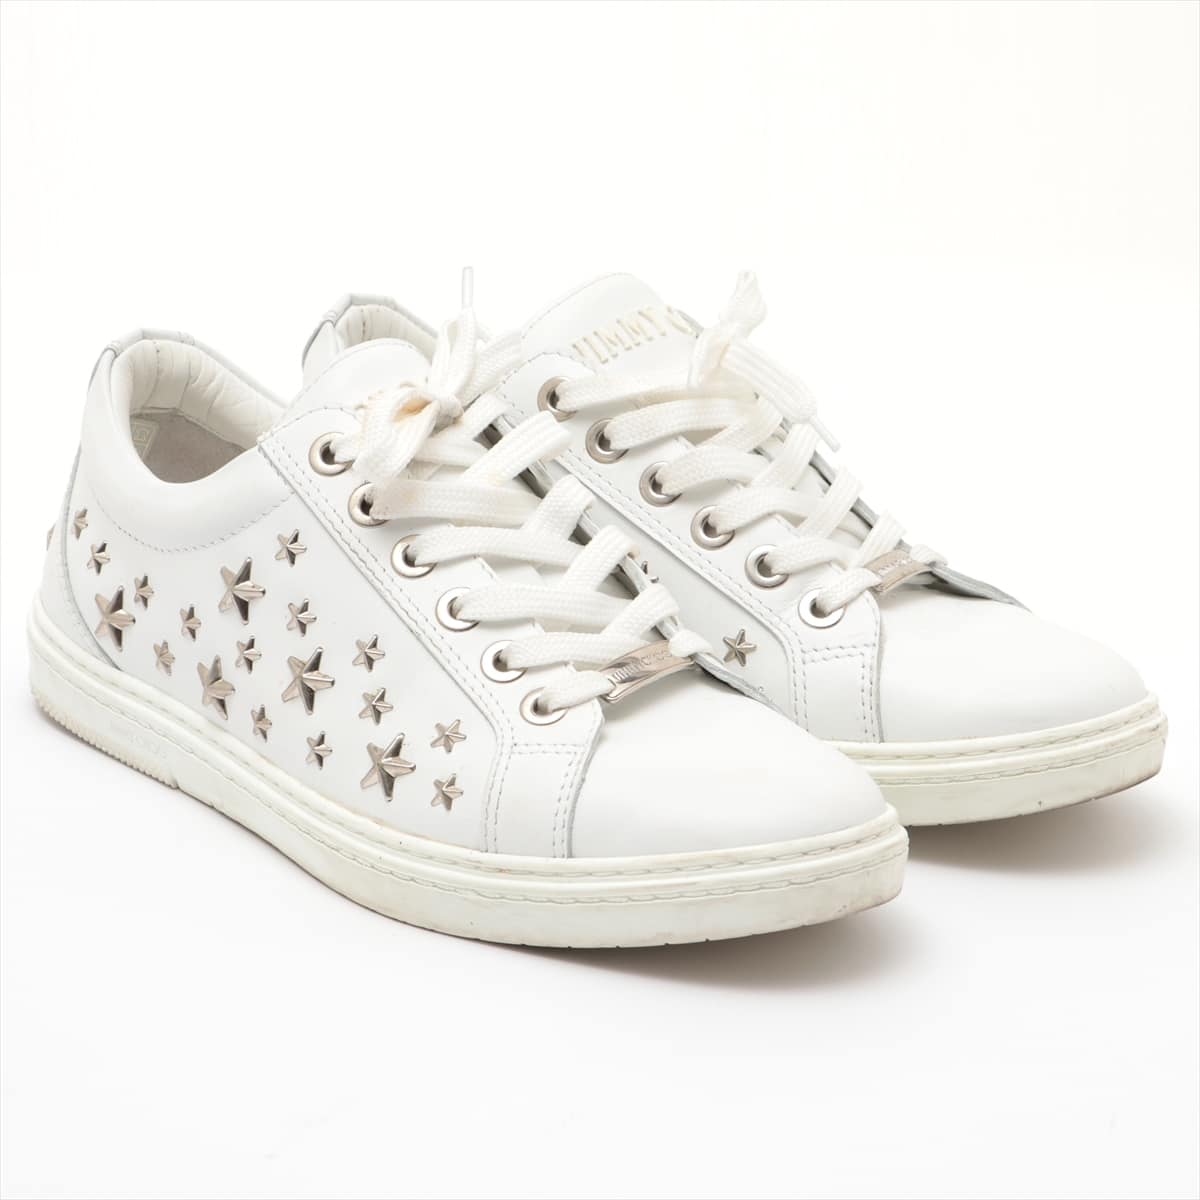 Jimmy Choo Star studs Leather Sneakers 40 Men's White